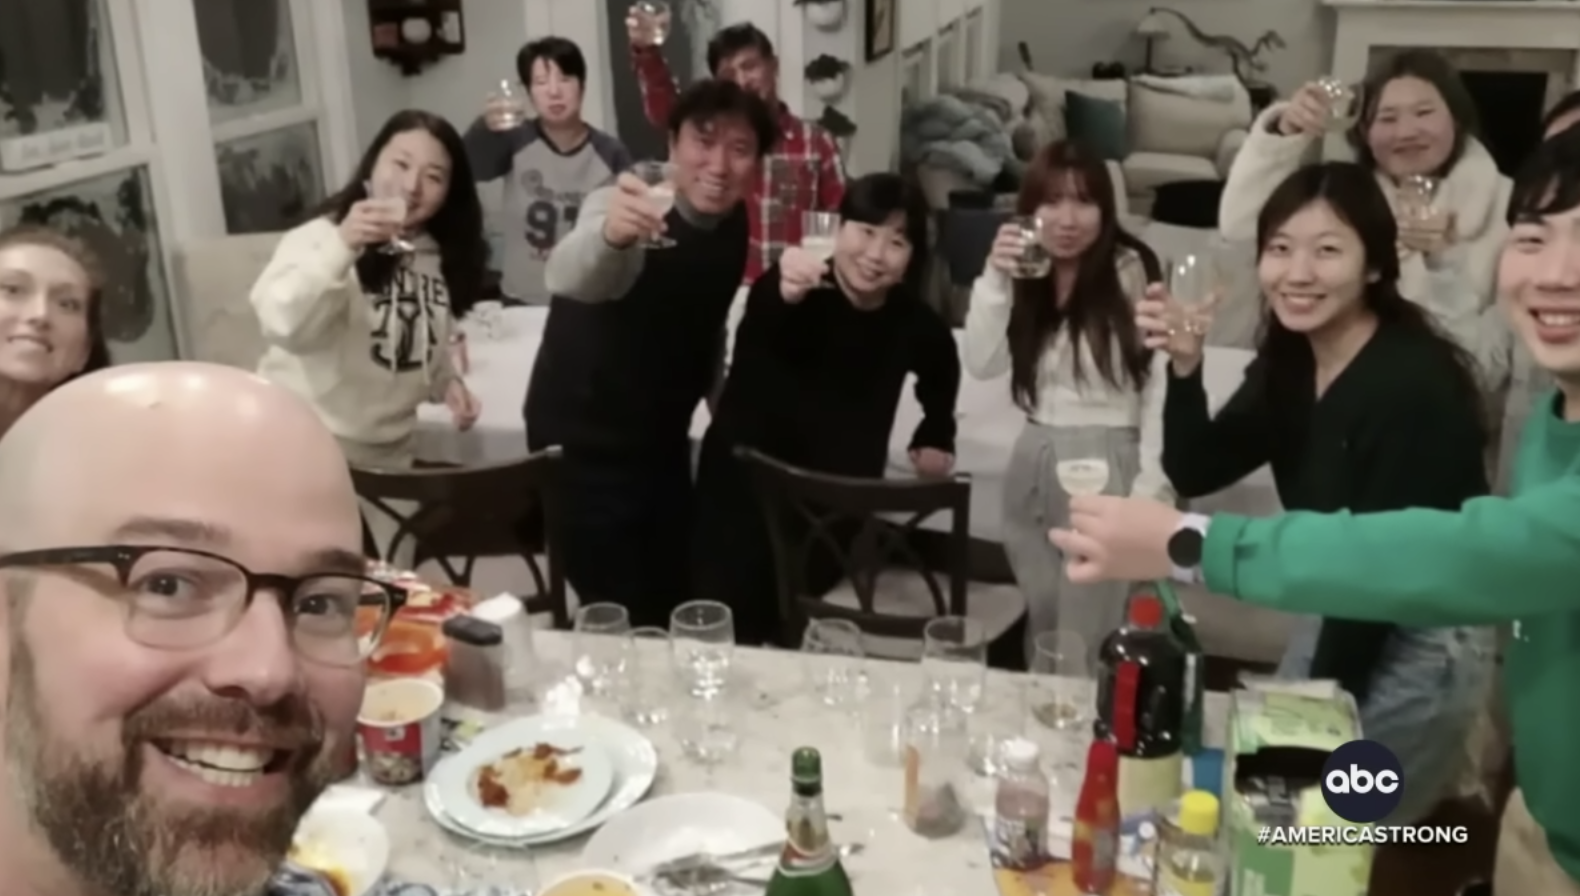 Buffalo, New York couple welcome stranded tourists from South Korea into their home.